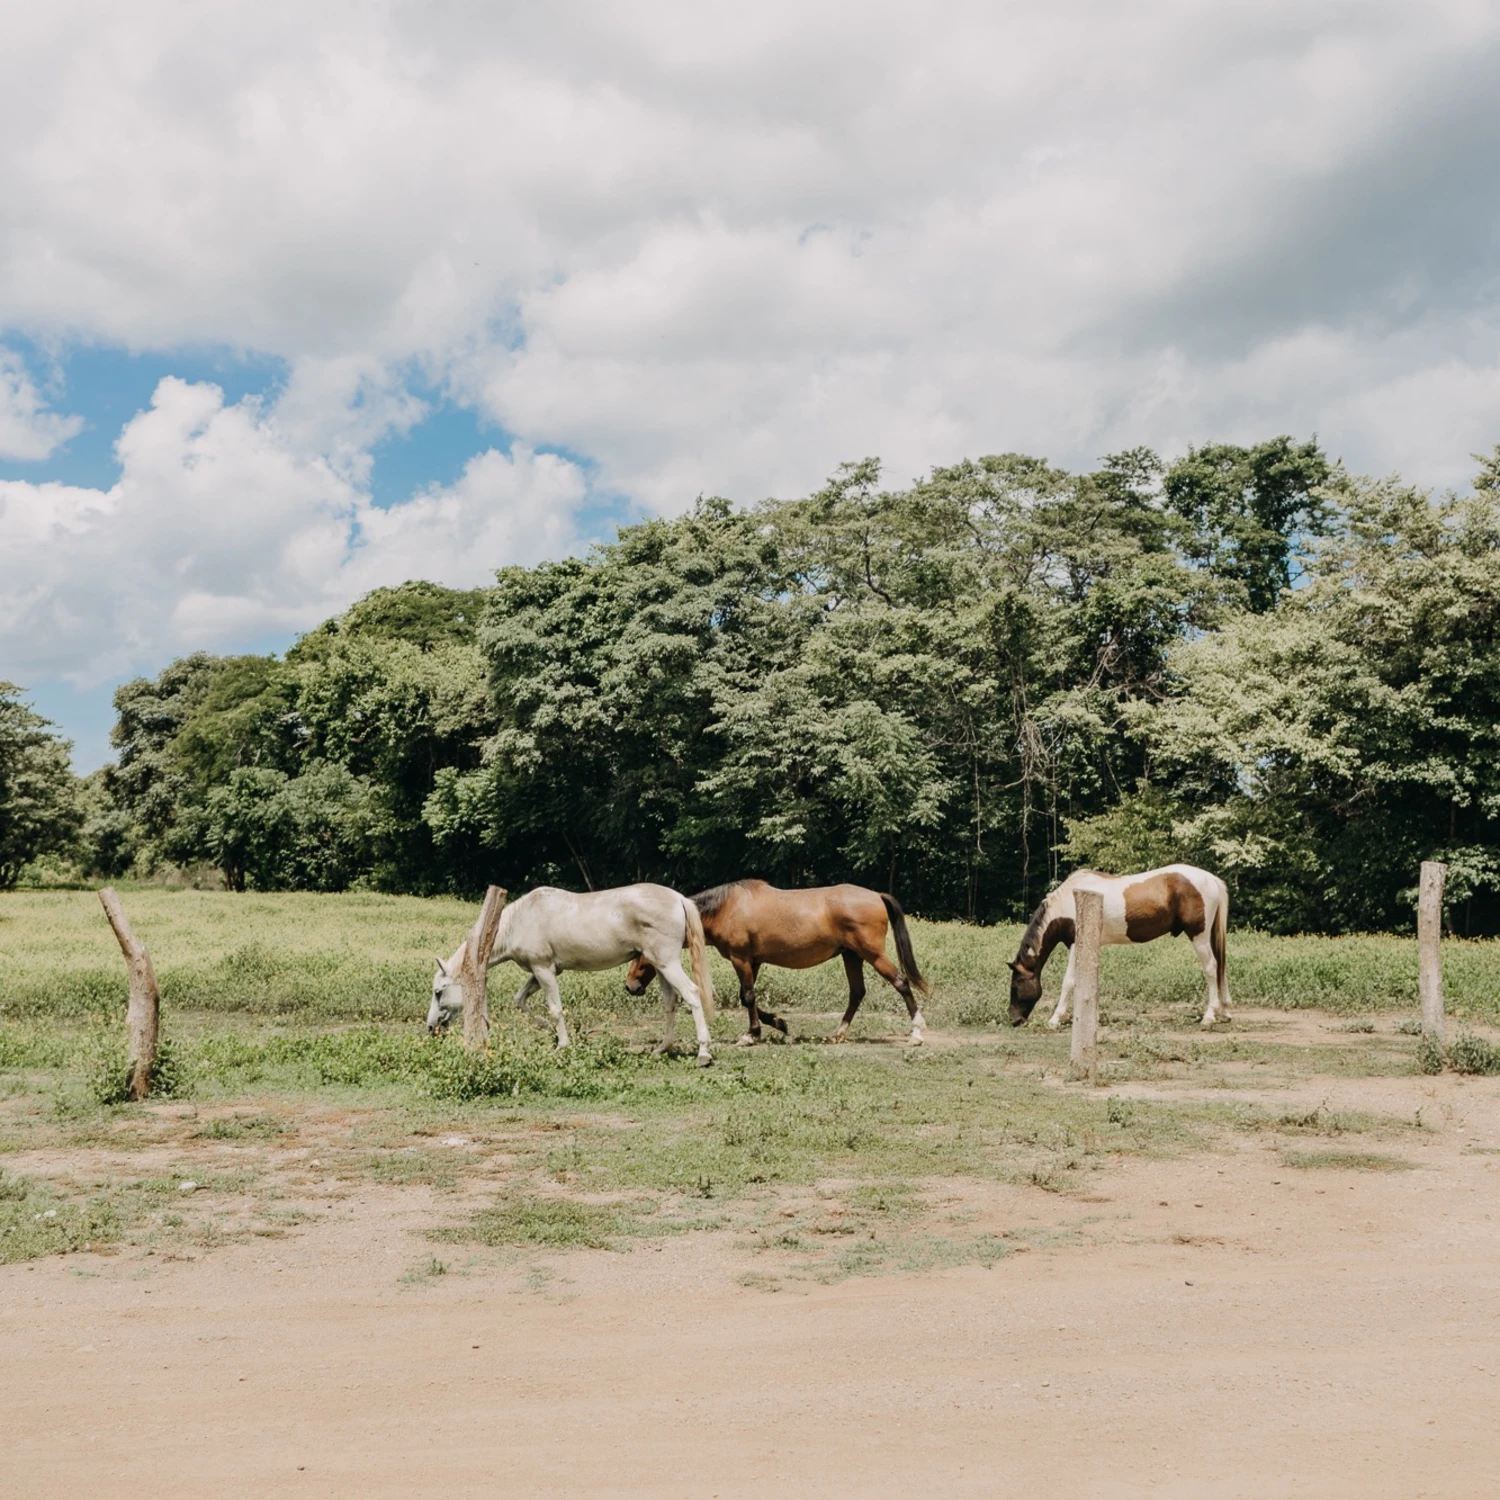 A scenic view of trees with horses grazing